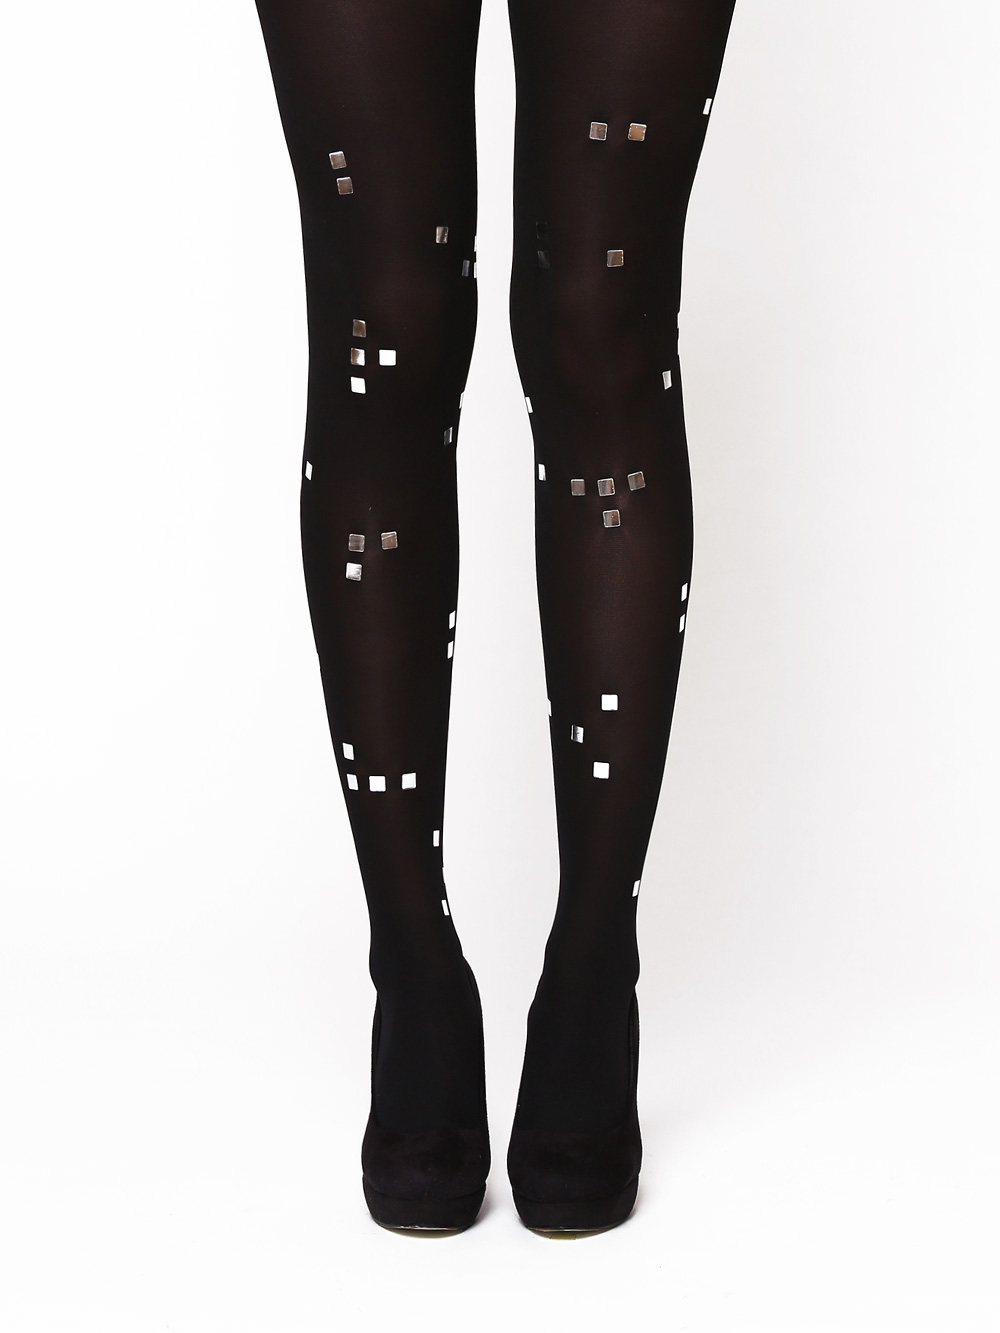 Clowder of cats tights in white - Virivee Tights - Unique tights